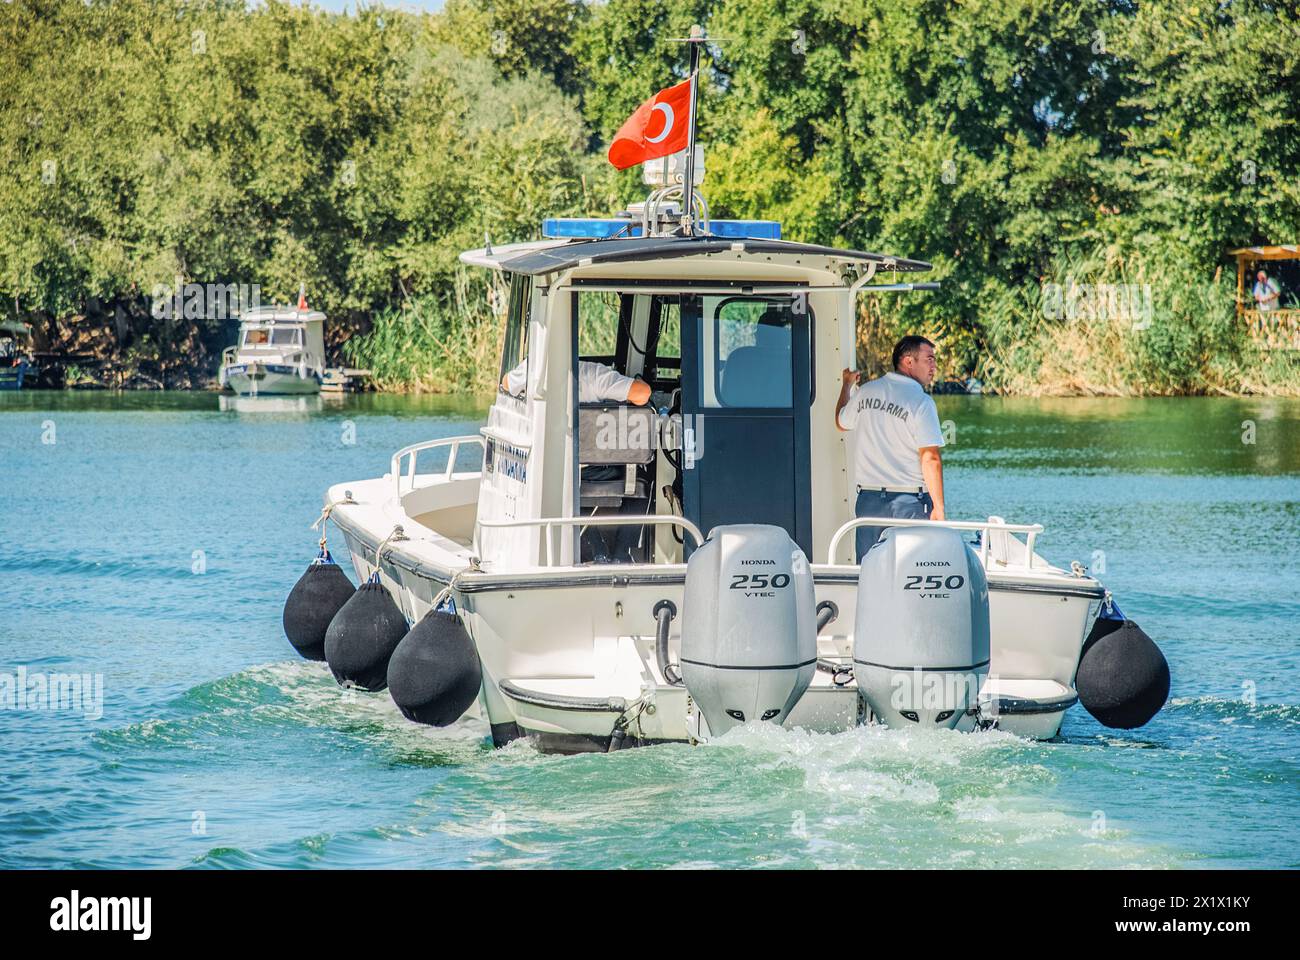 Dalyan, Turkey - September 13 2015: Gendarmerie speedboat cruises the river with officers aboard, ensuring safety and order Stock Photo